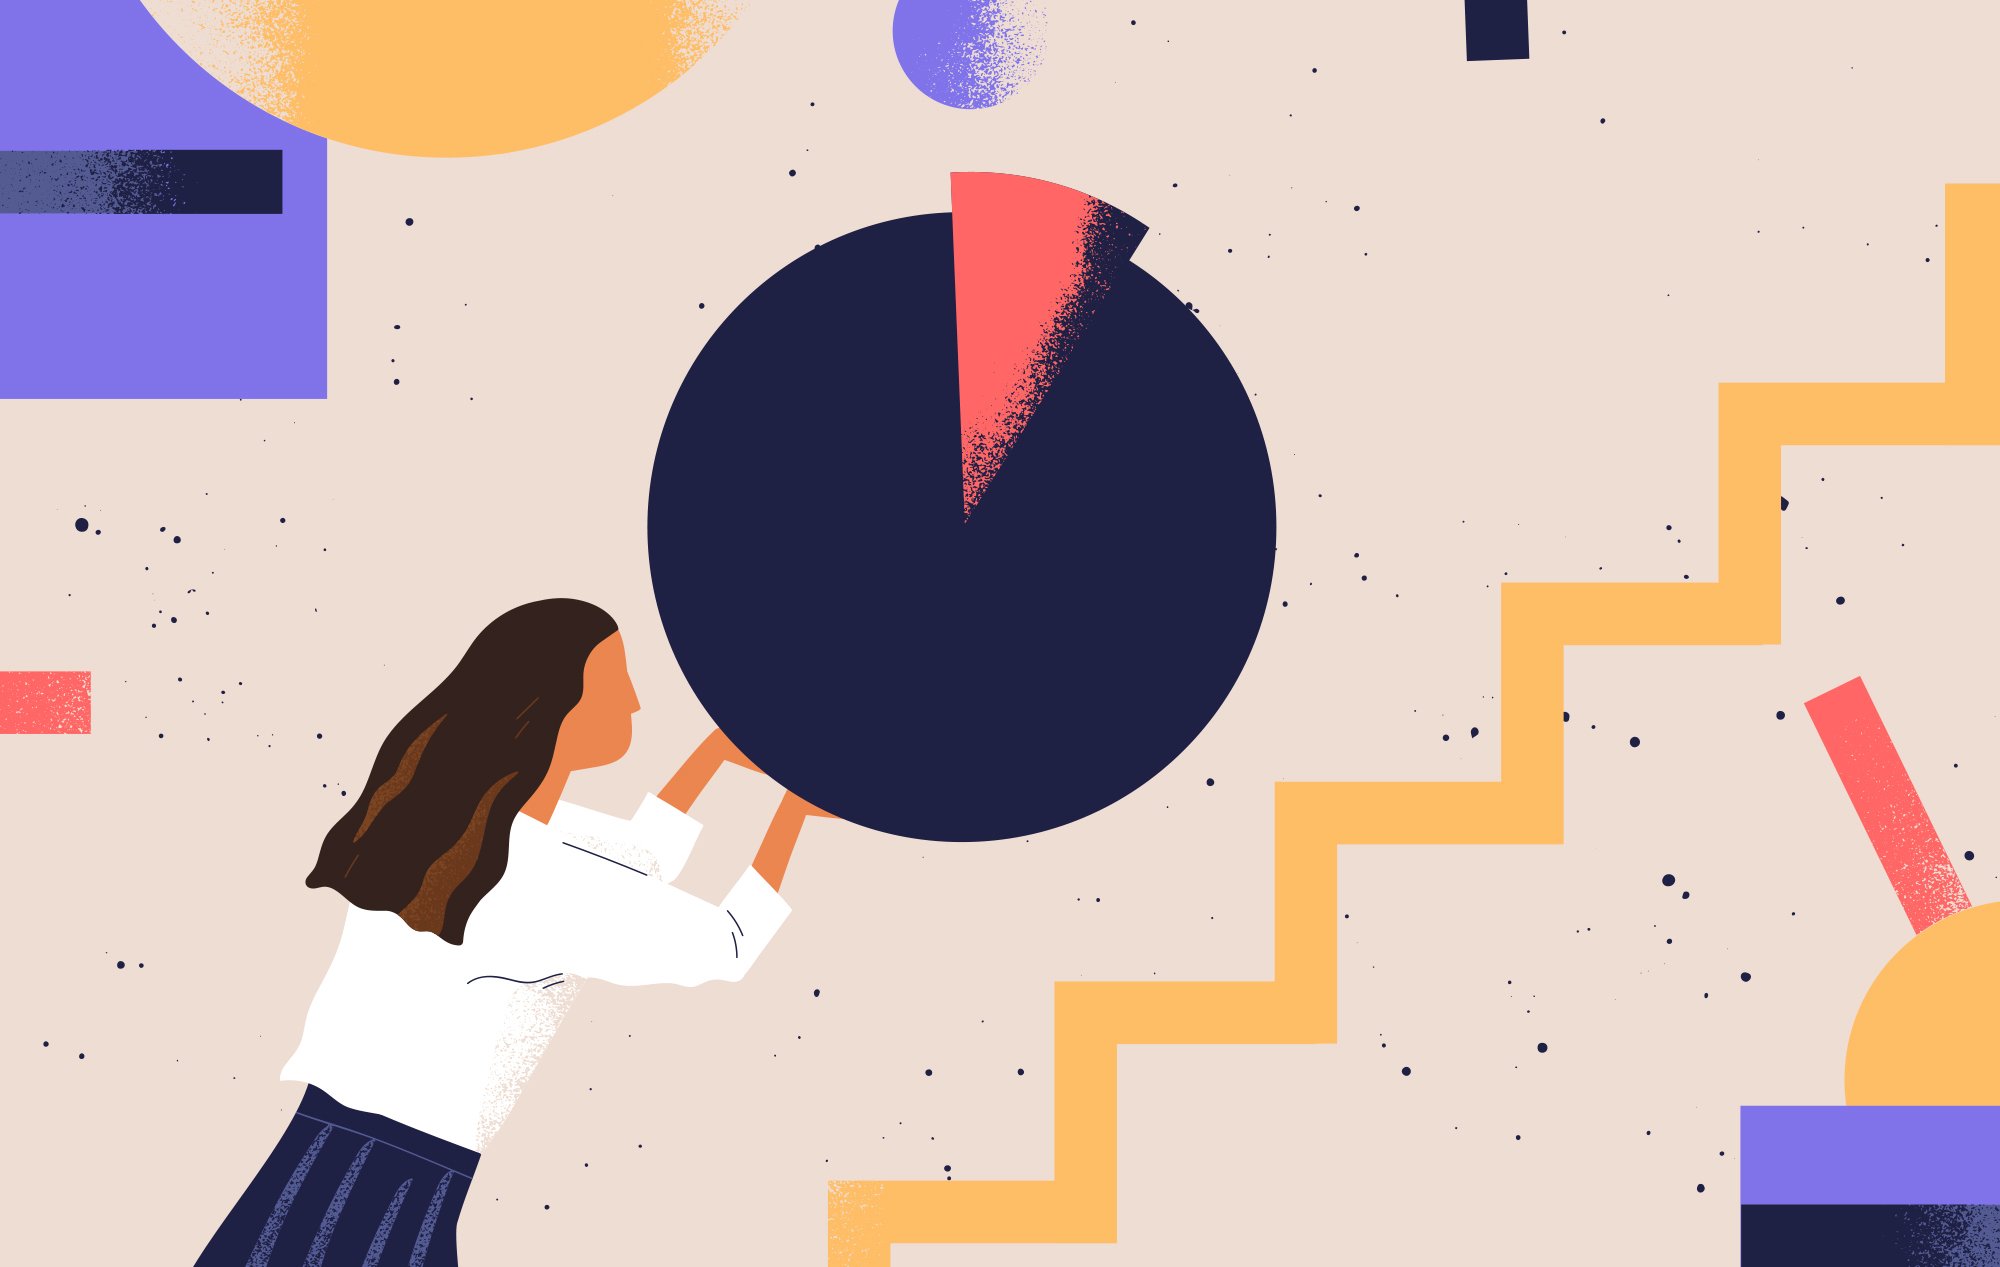 Illustration of a woman lifting up a pie chart. Abstract geometric shapes float in the background.